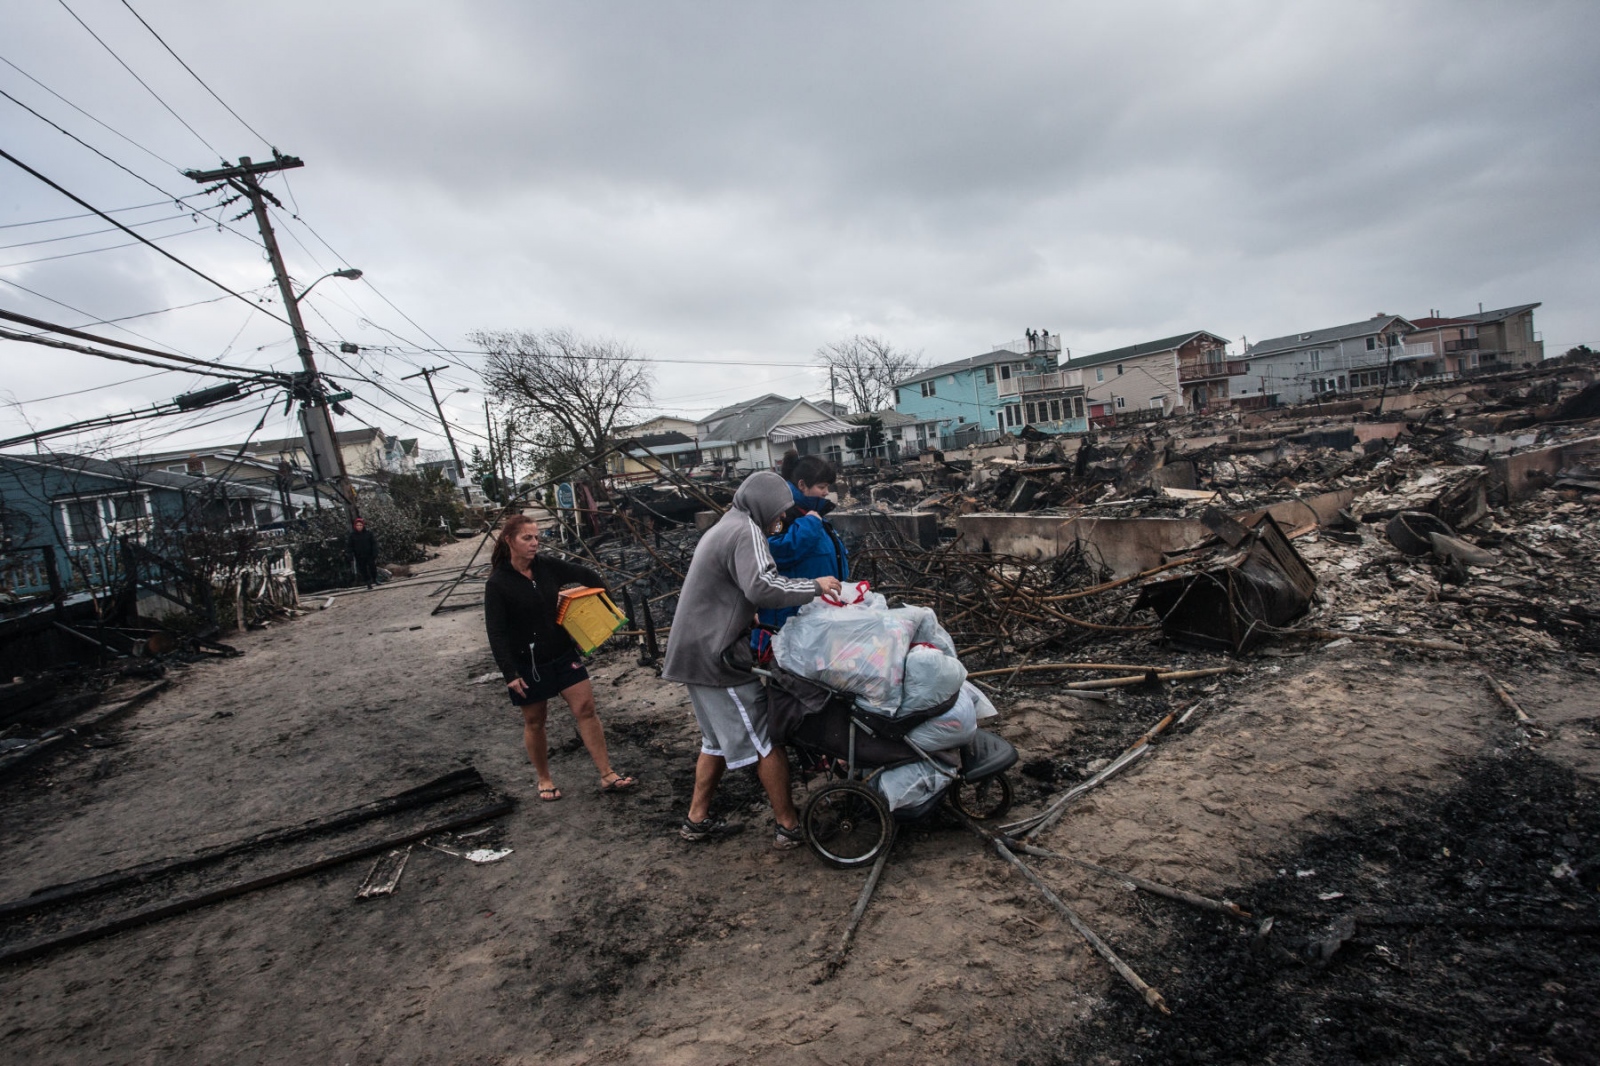 The Rockaways After Hurricane Sandy - Residents of the fire devastated area of Breezy Point...